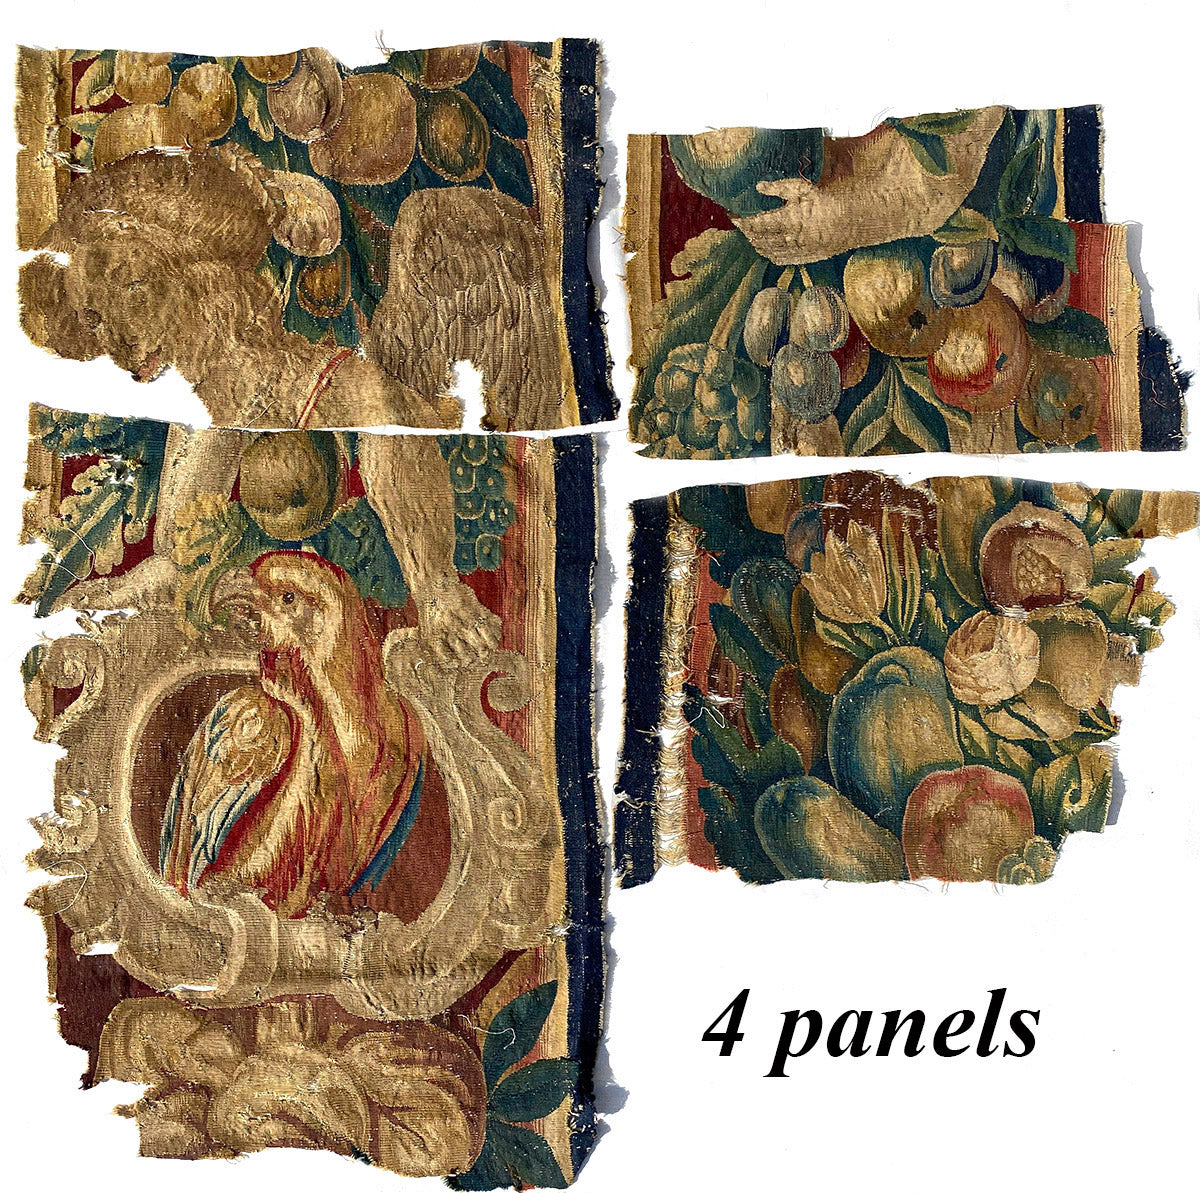 Fine Antique French c.1600s Aubusson Tapestry Panel Set of 4 for Pillow Projects, 17th Century